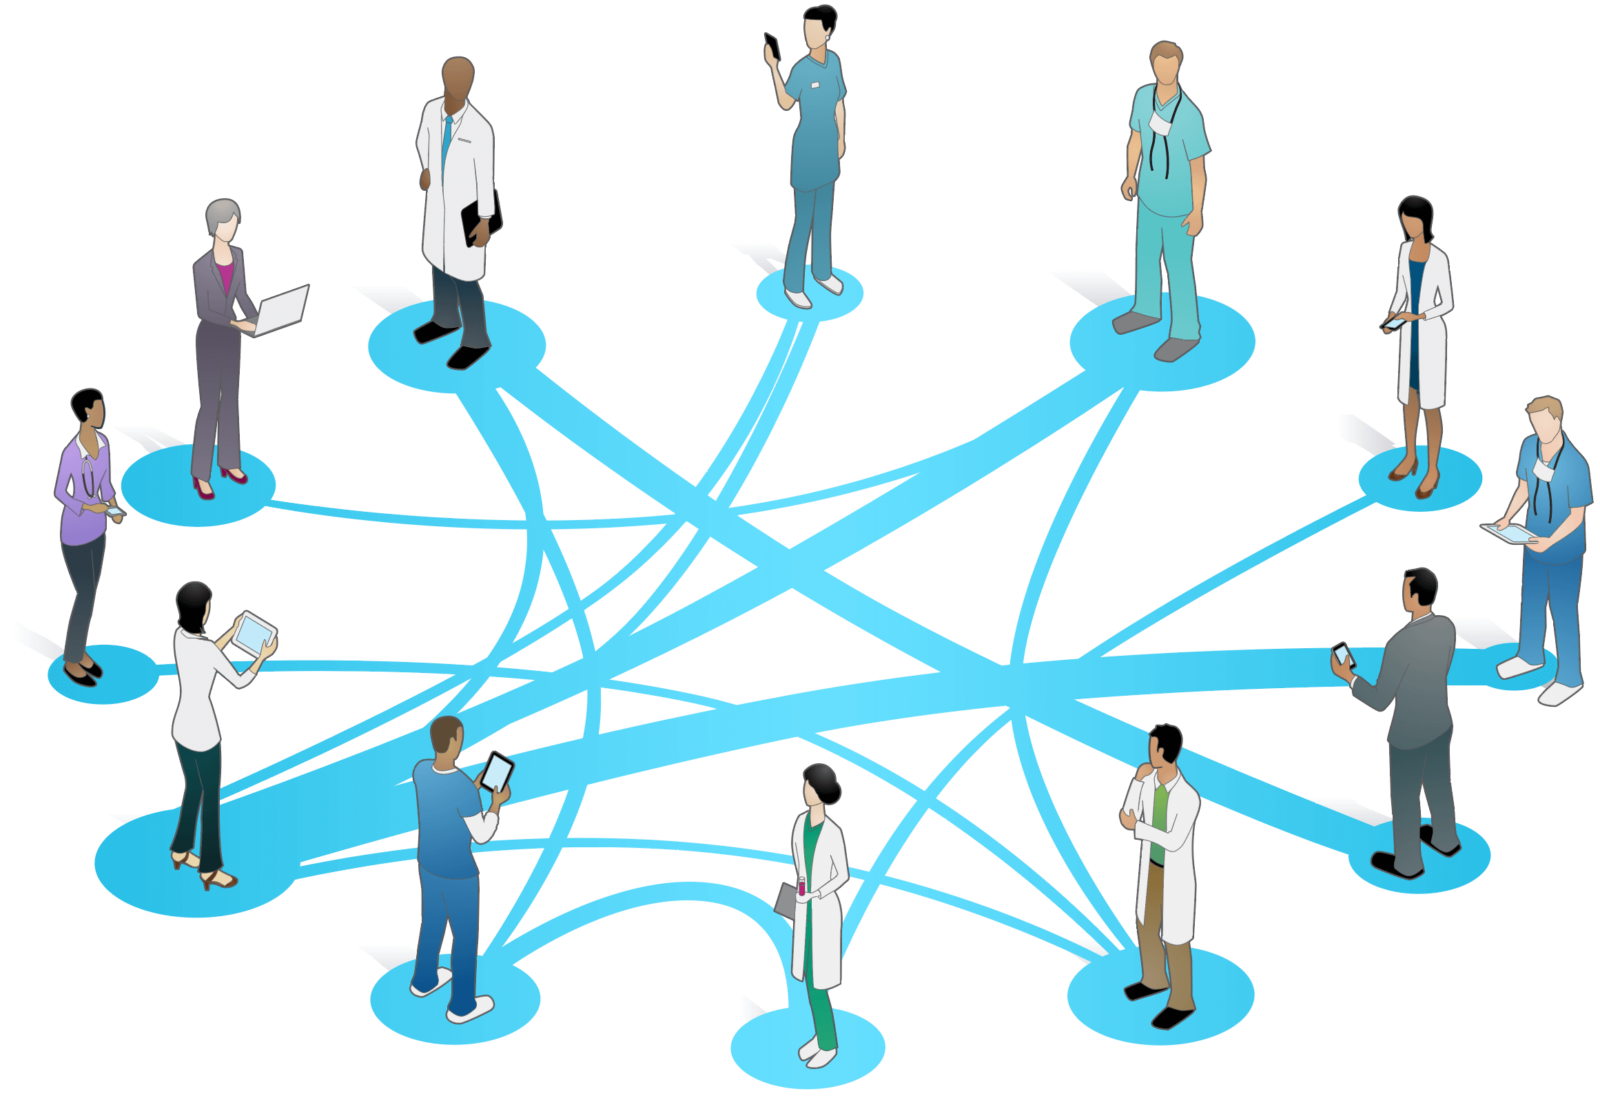 A network of health providers standing in a circle. A network of curved lines connect them.